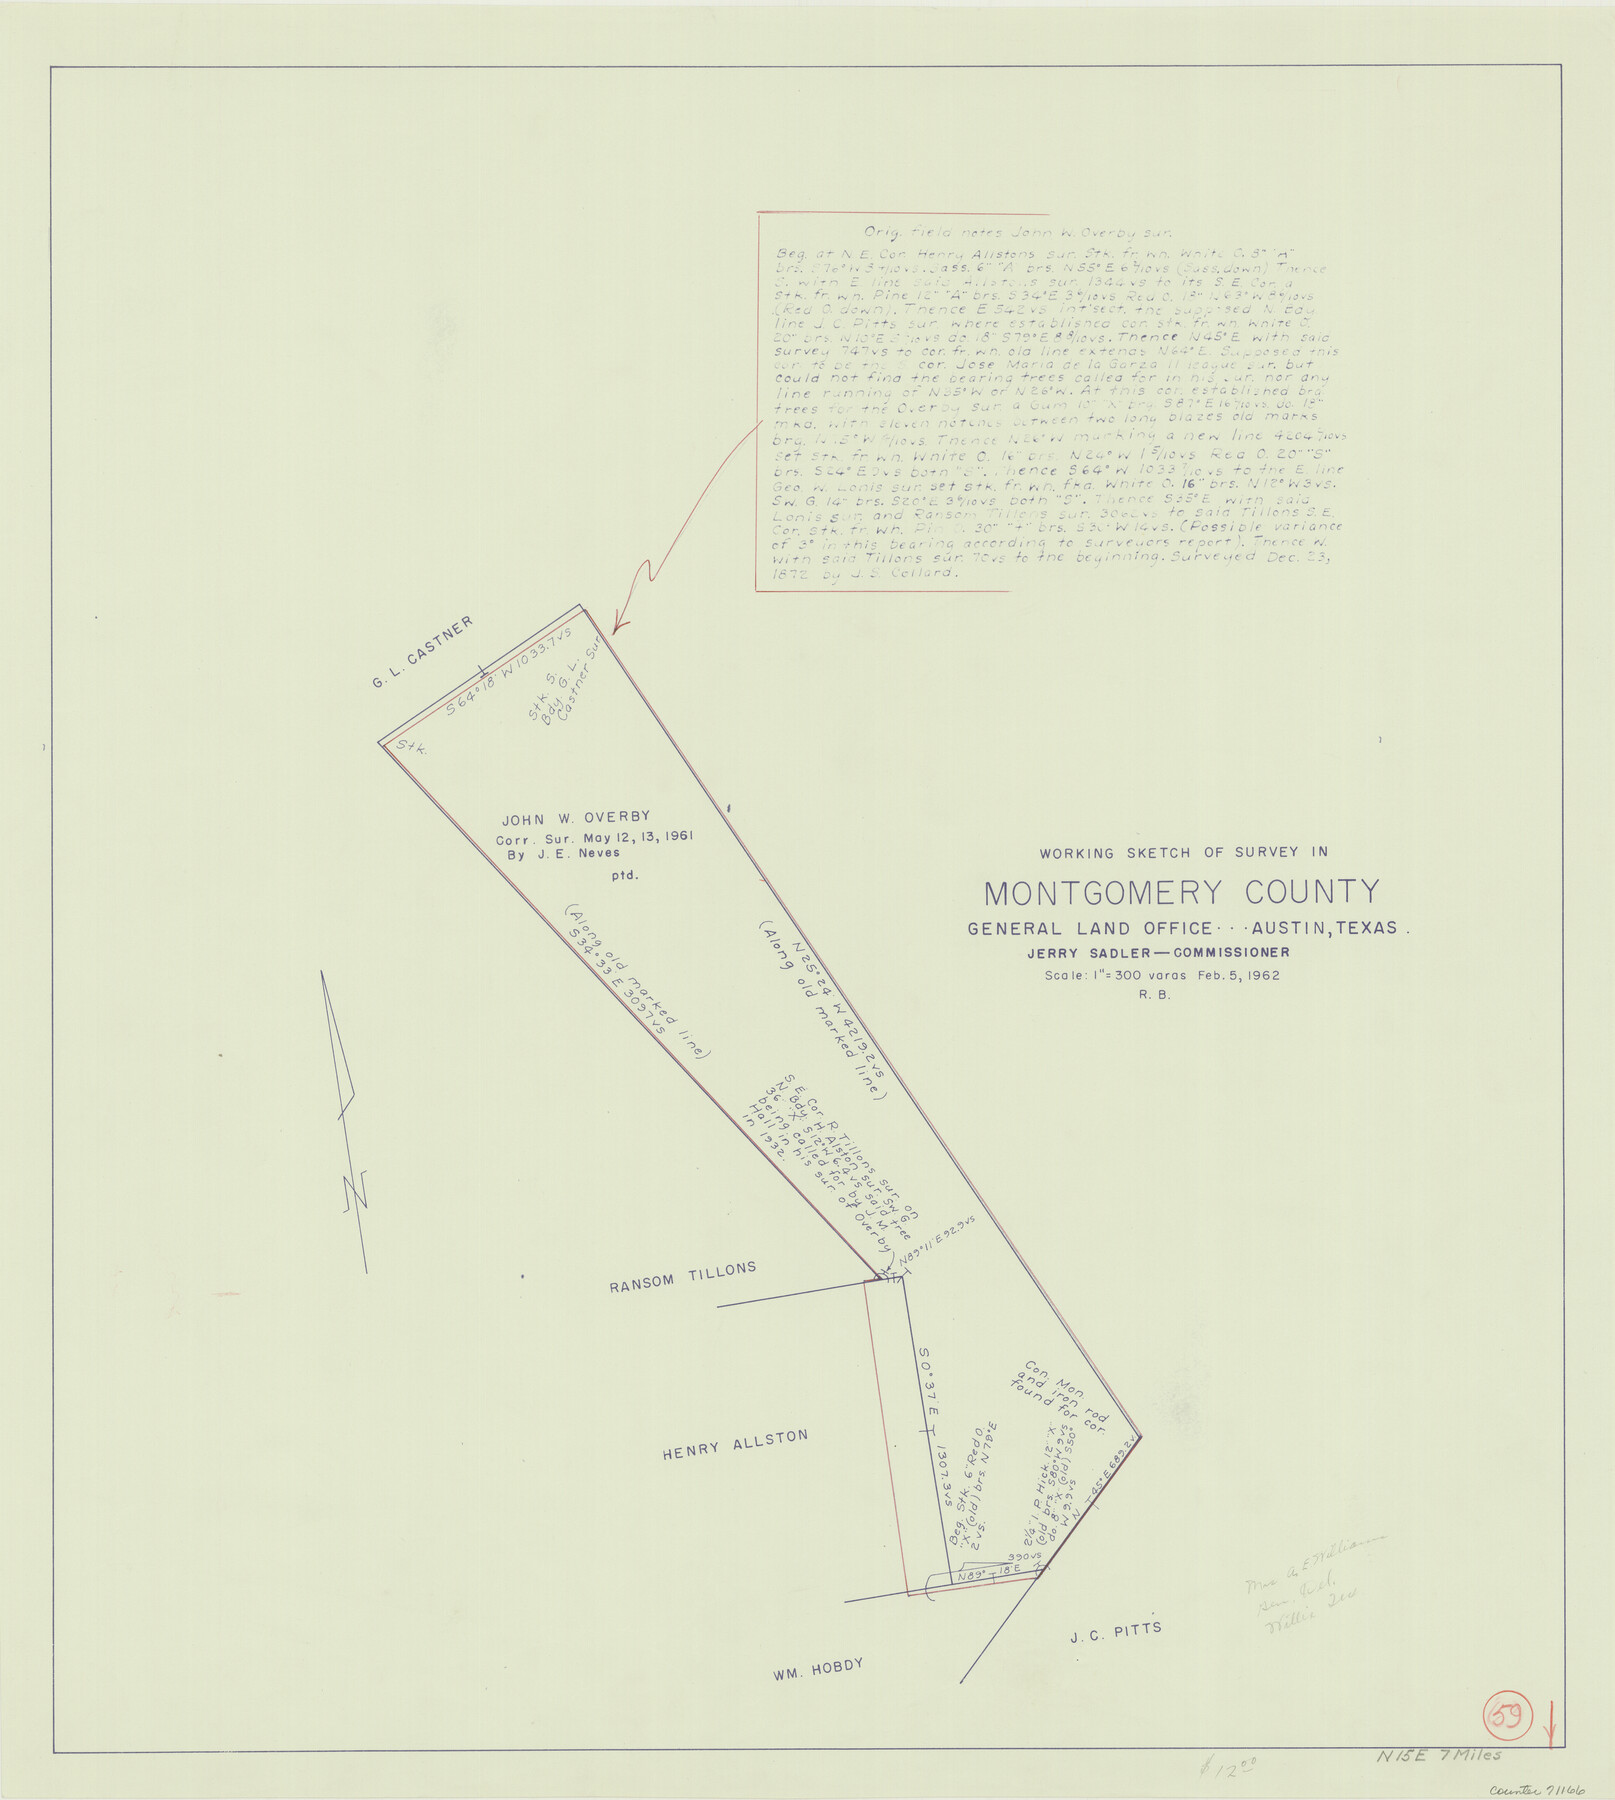 71166, Montgomery County Working Sketch 59, General Map Collection